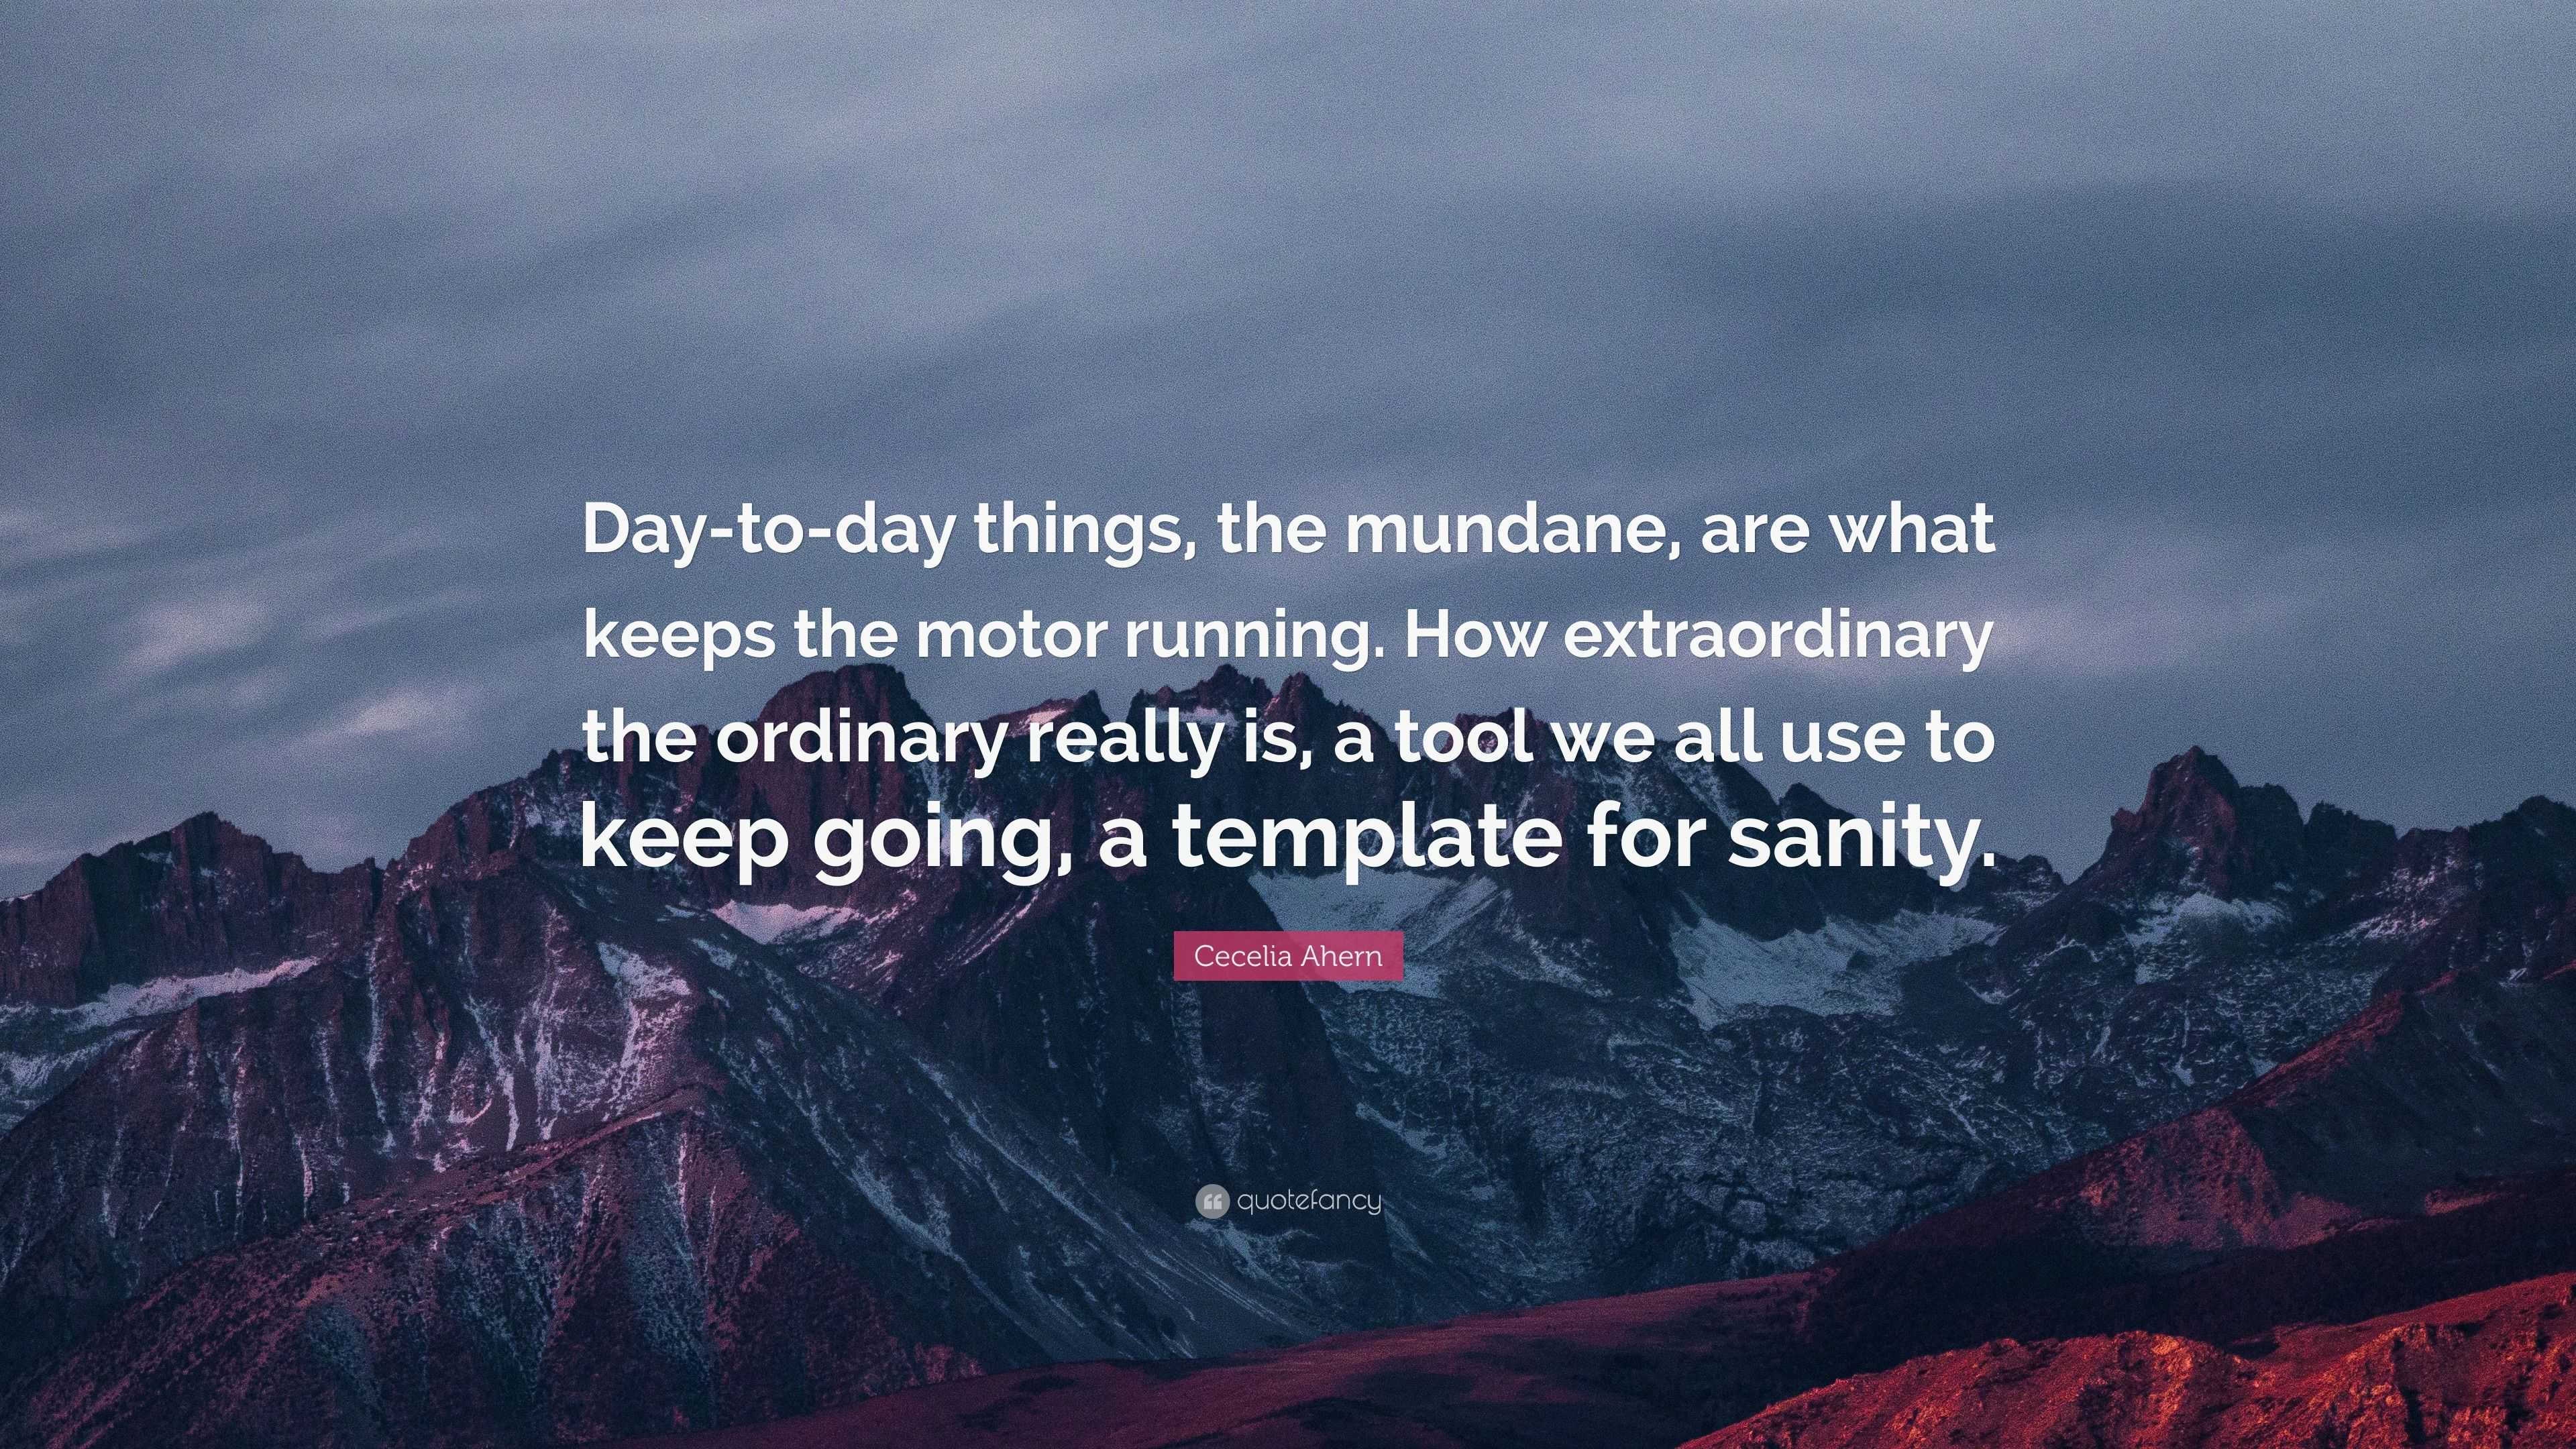 Cecelia Ahern Quote: “Day-to-day things, the mundane, are what keeps ...